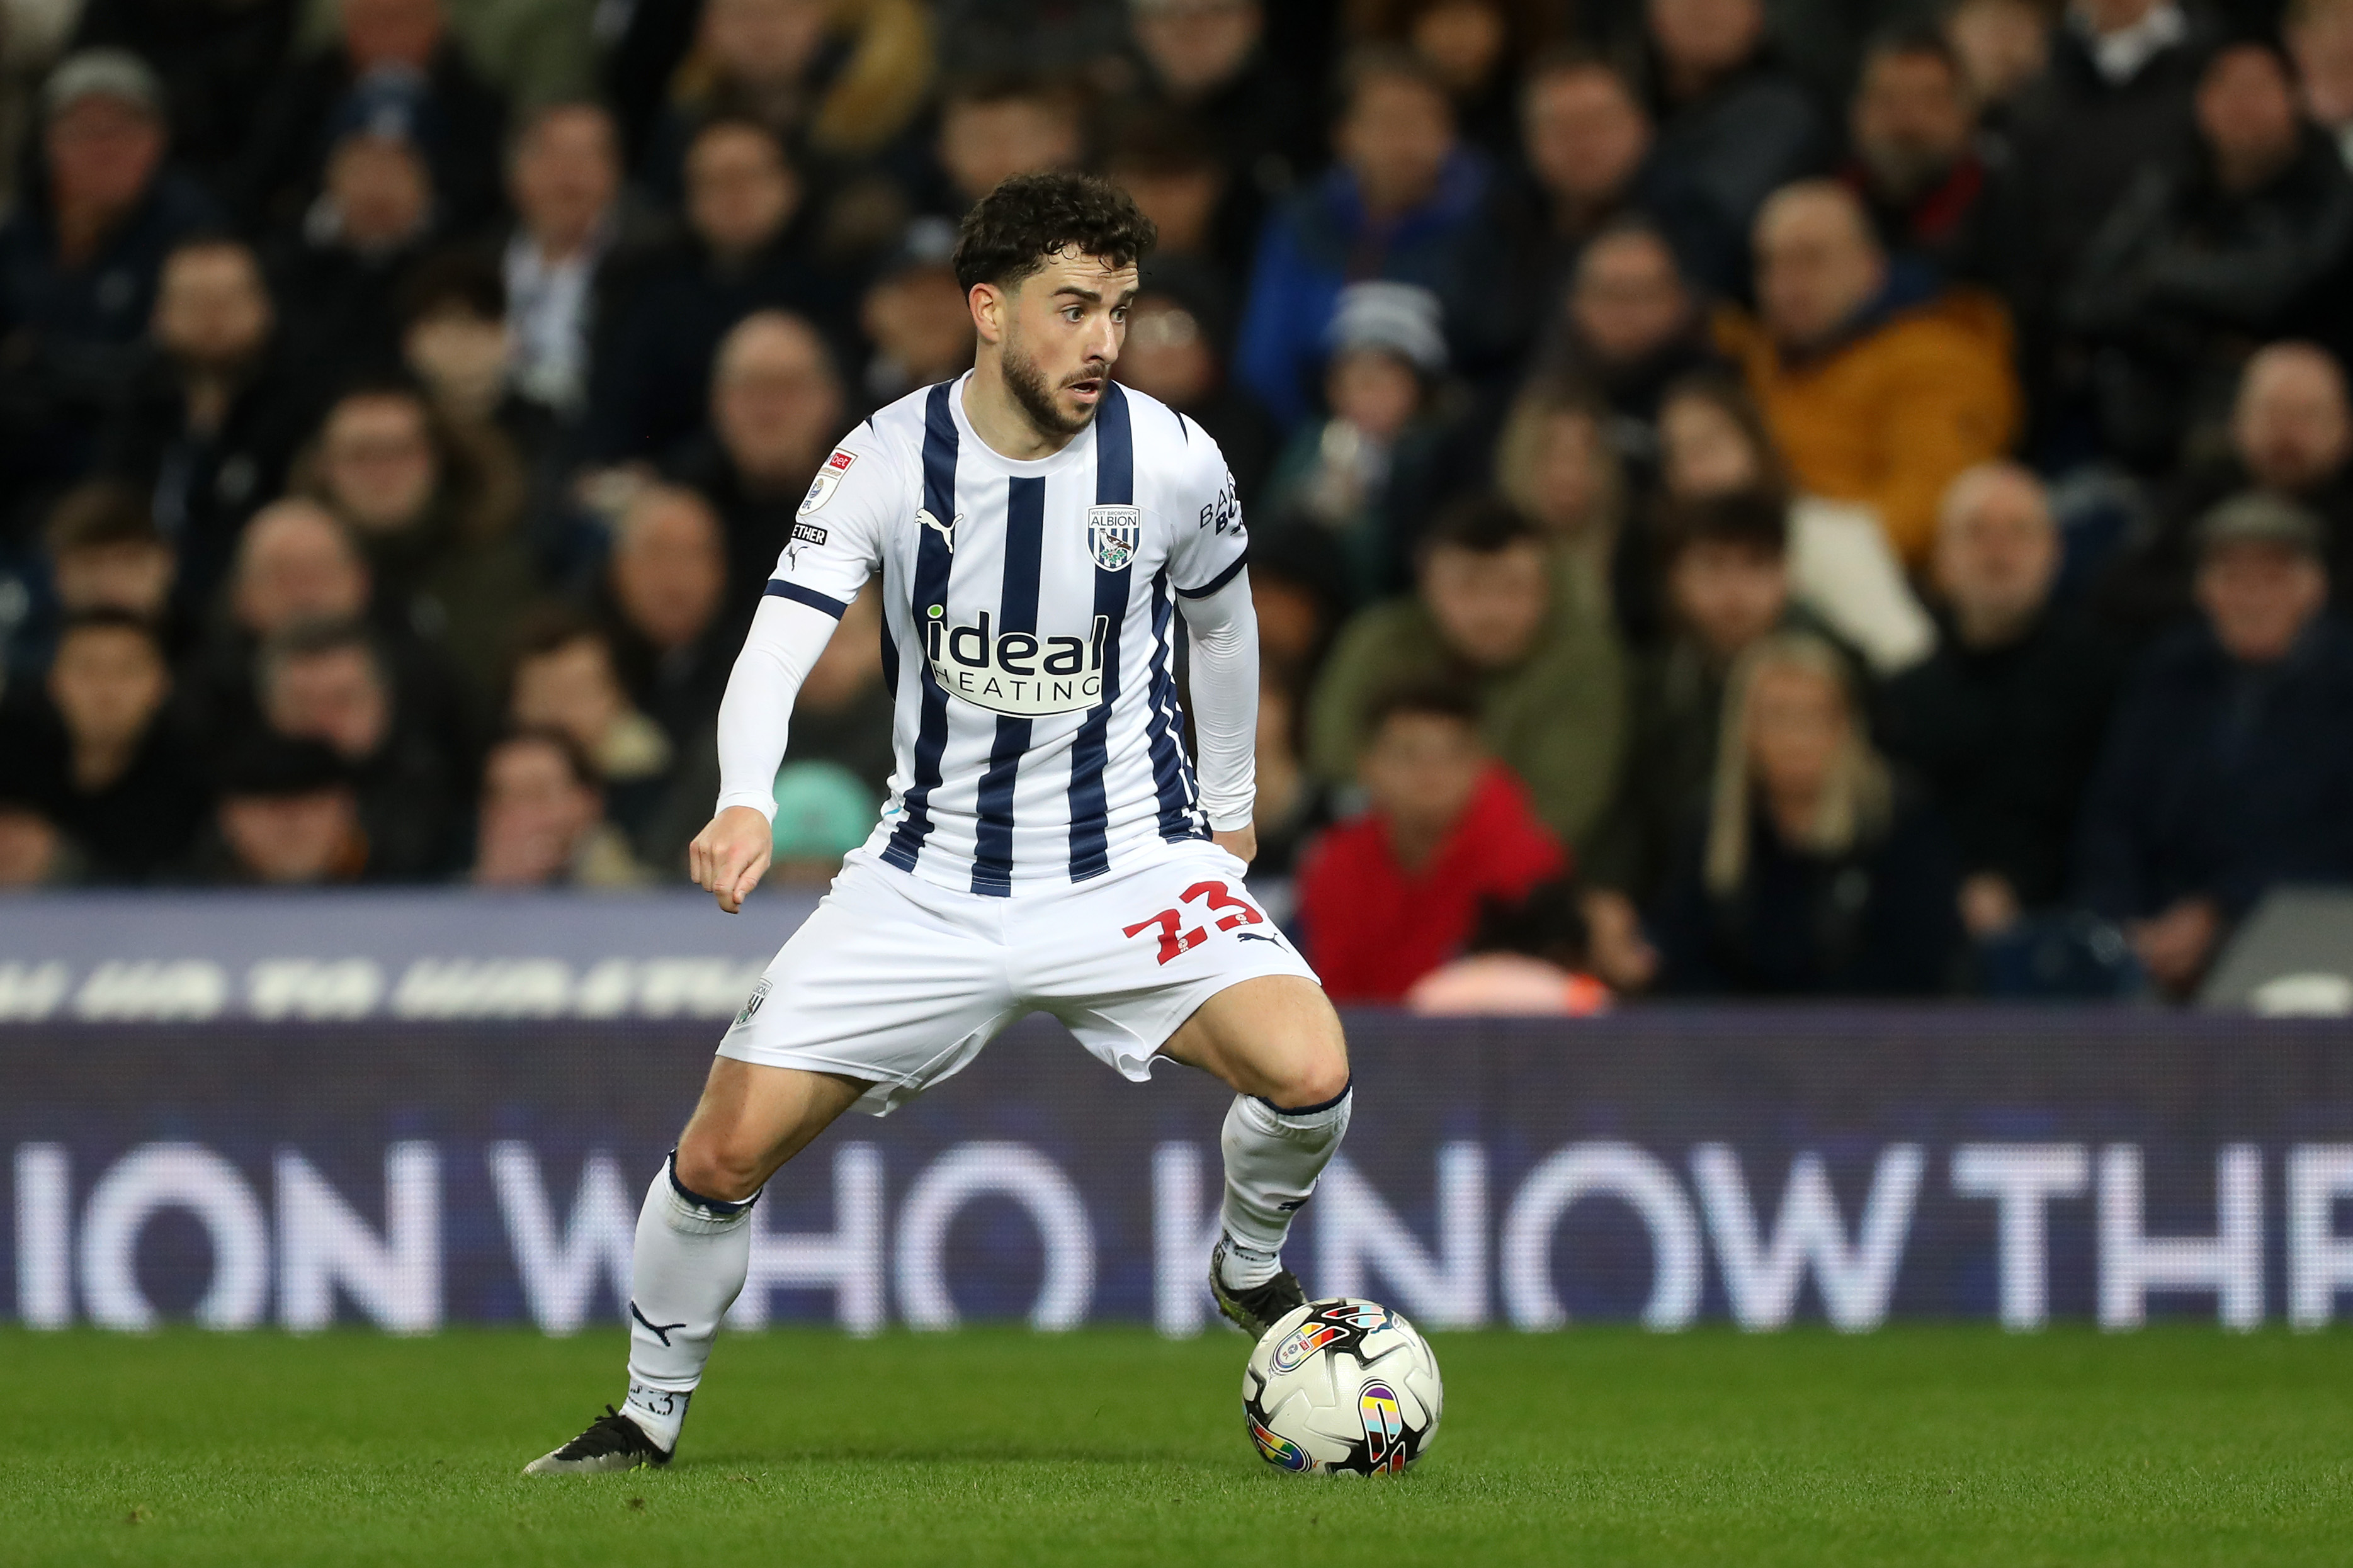 Mikey Johnston on the ball for Albion wearing the home kit during a game at The Hawthorns